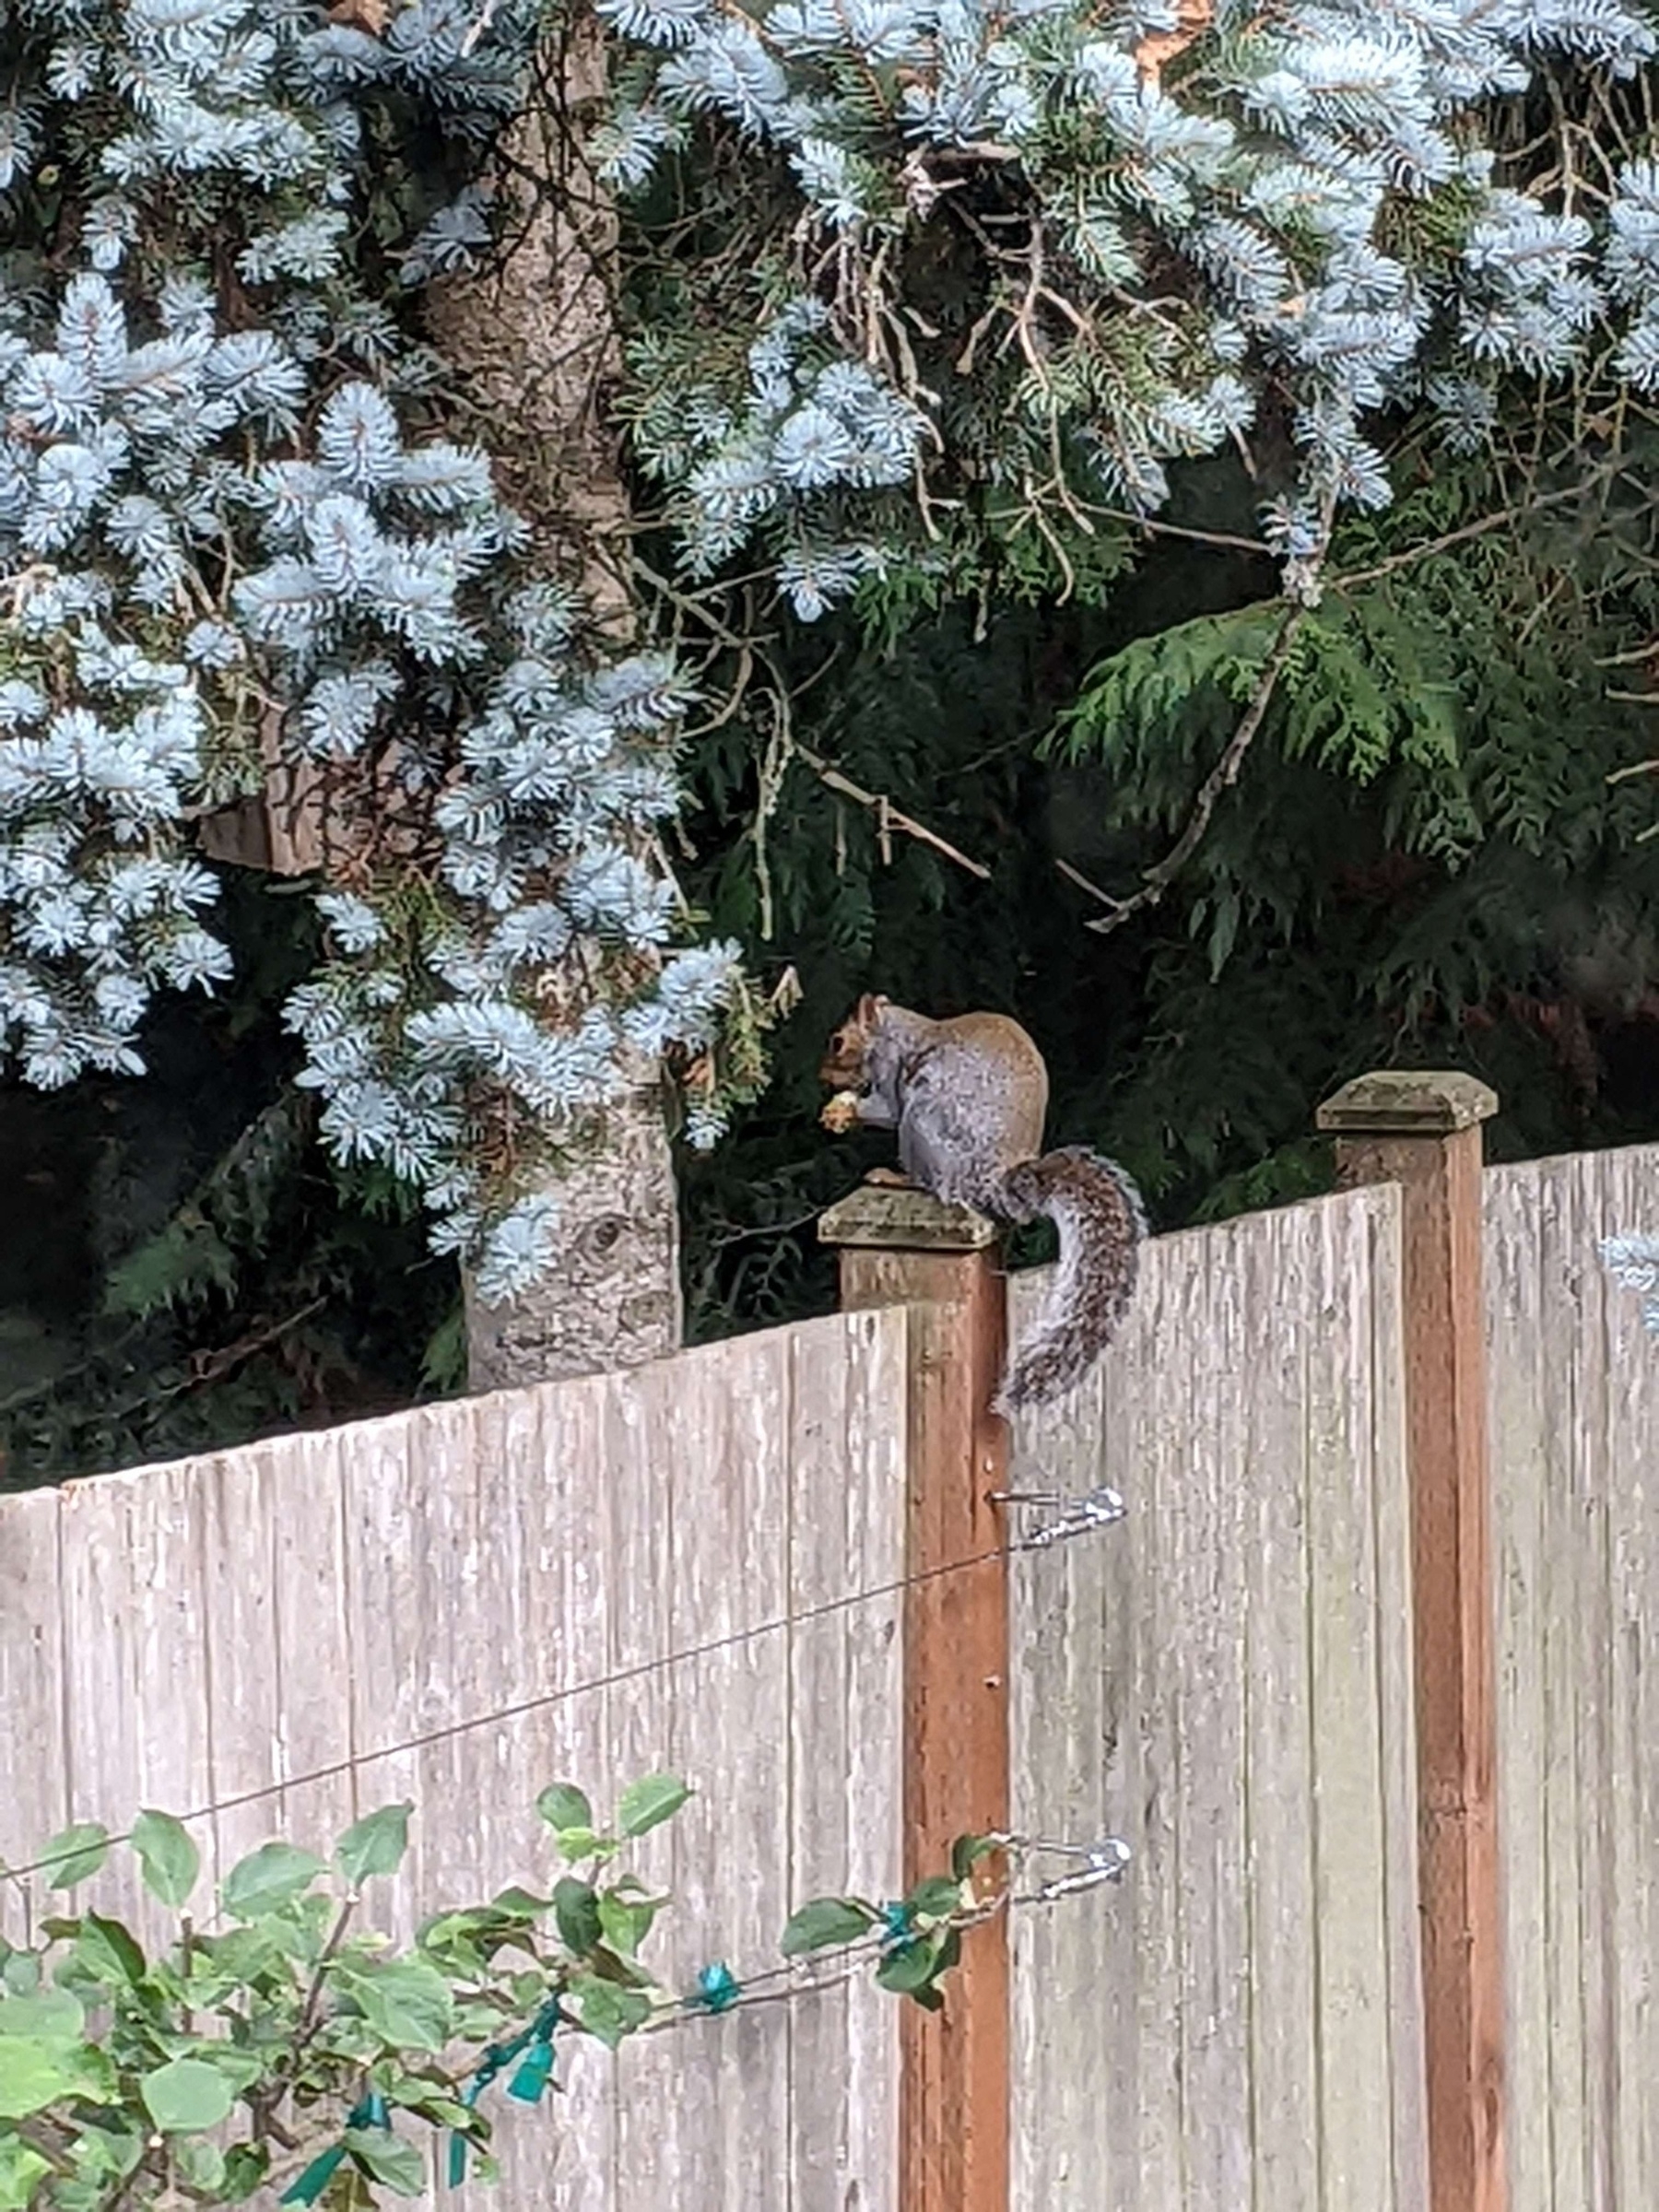 Squirrel perches on fencepost, eating a green fig, under a blue spruce 